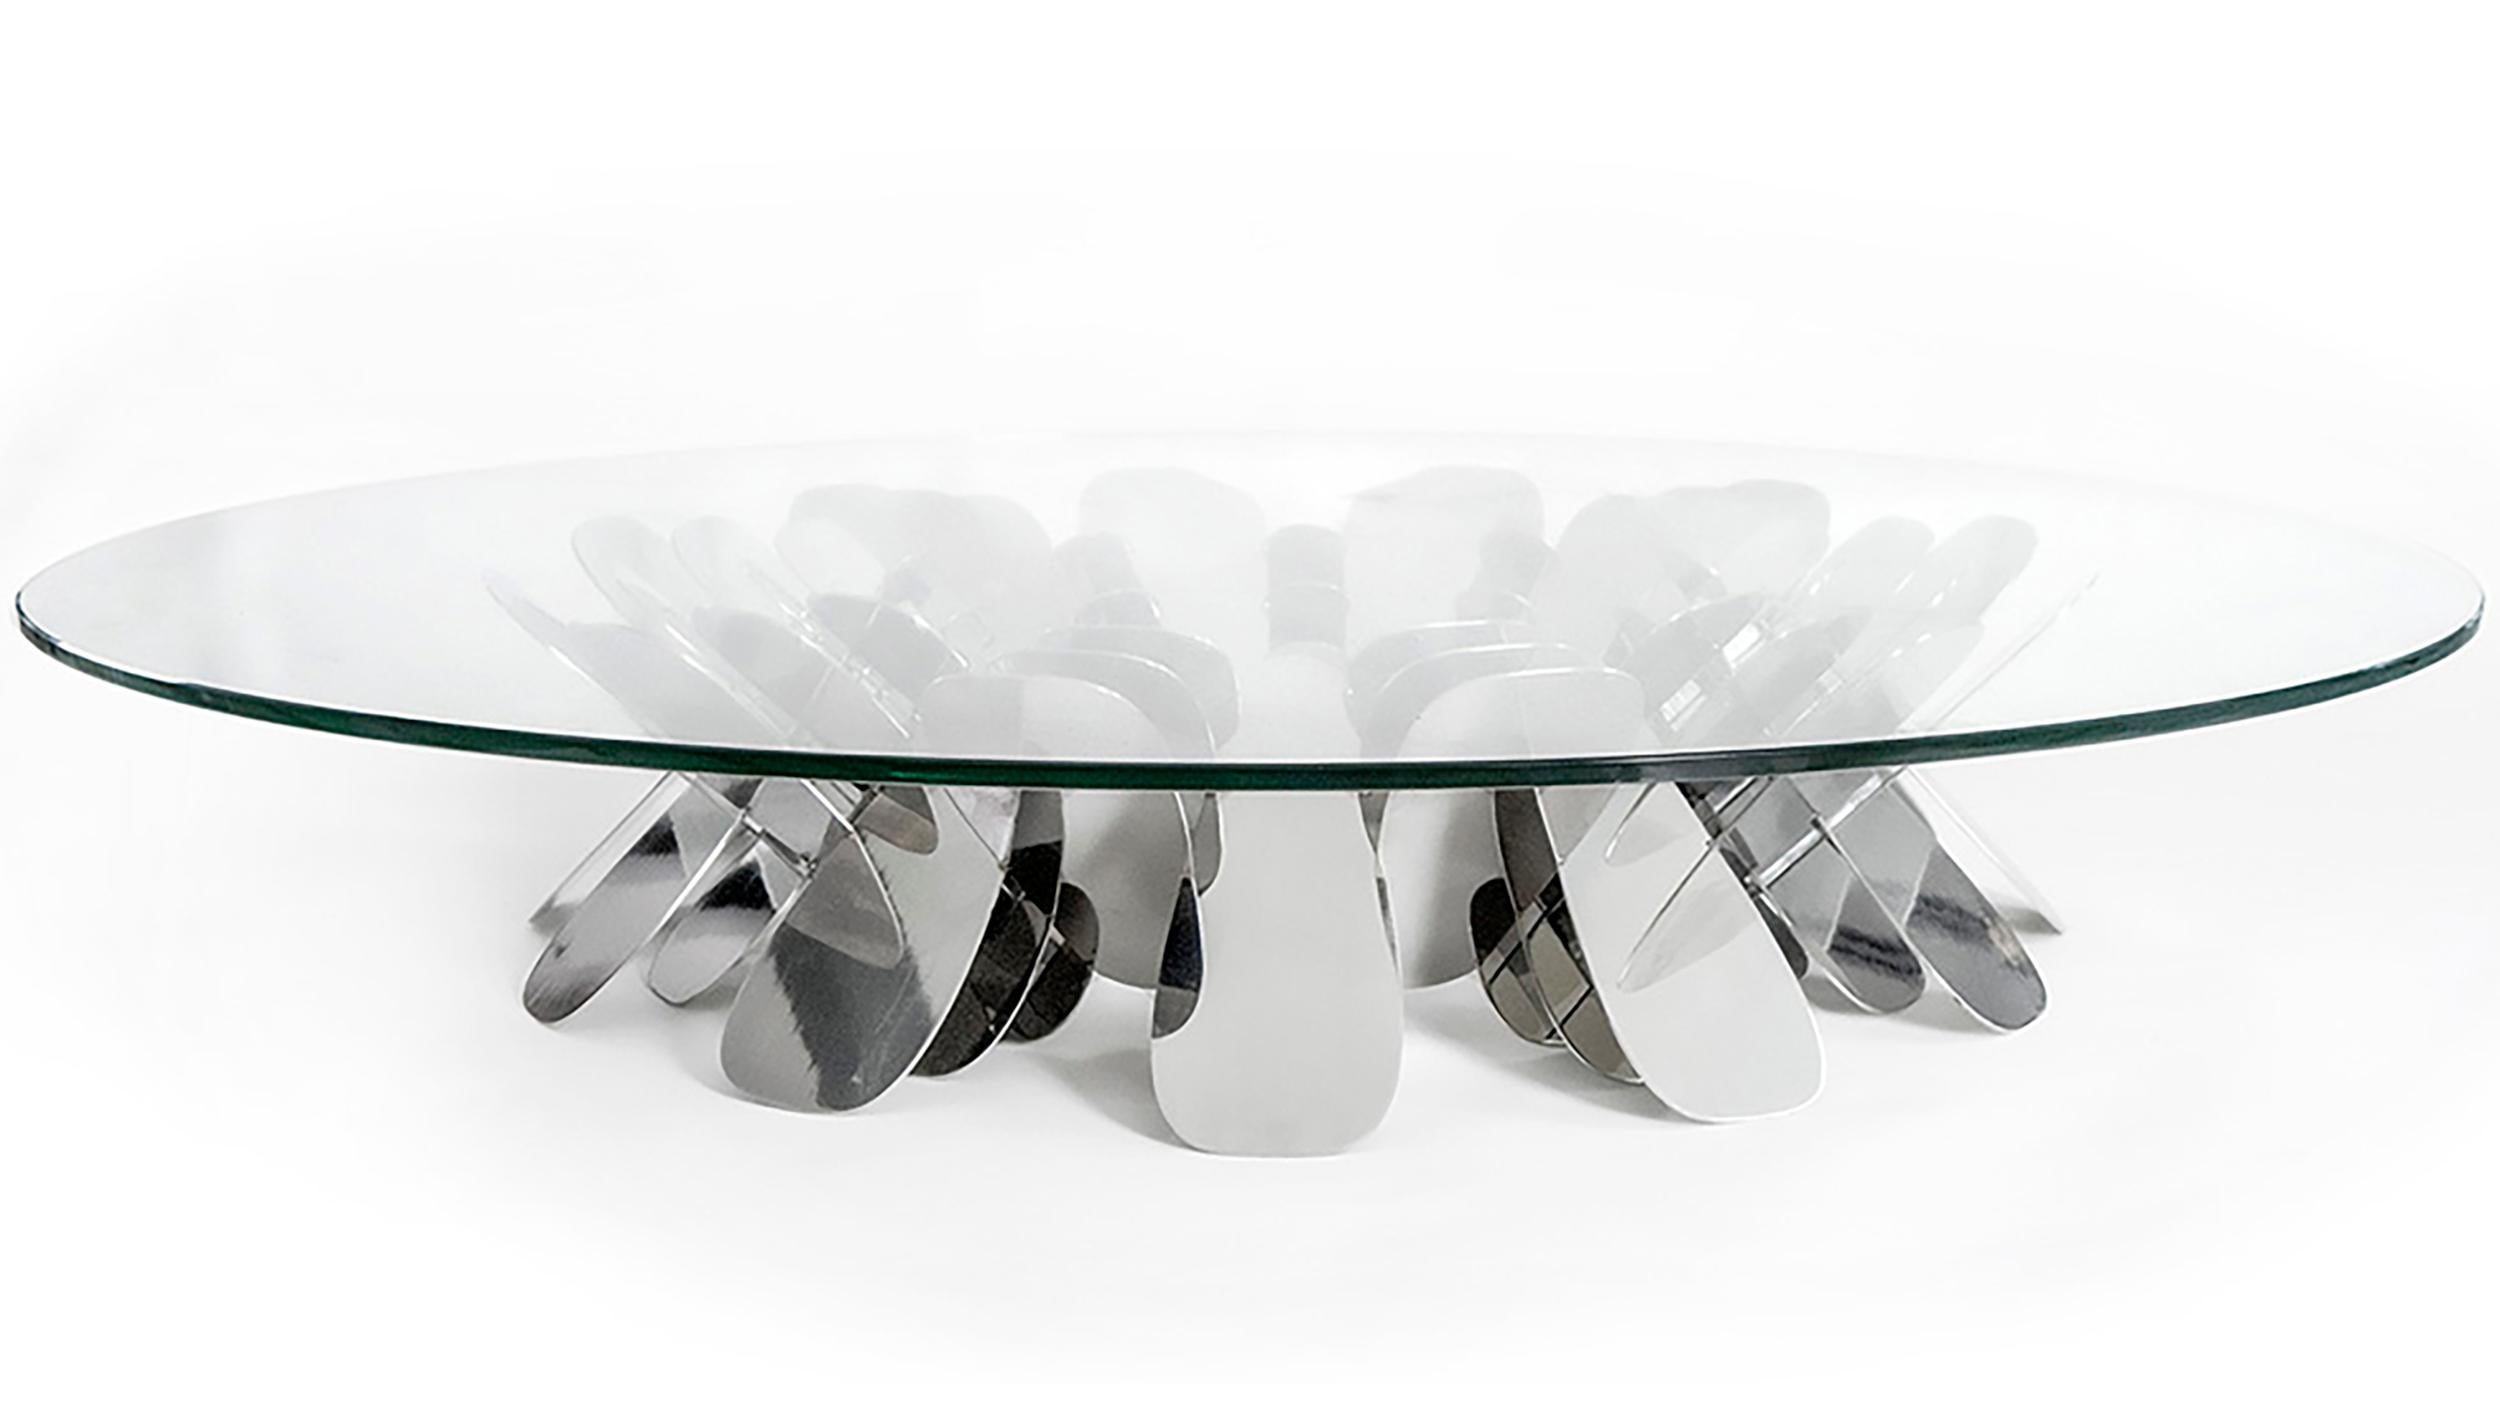 Narciso, Sculptural geometric stainless steel center table by Pedro Cerisola For Sale 2